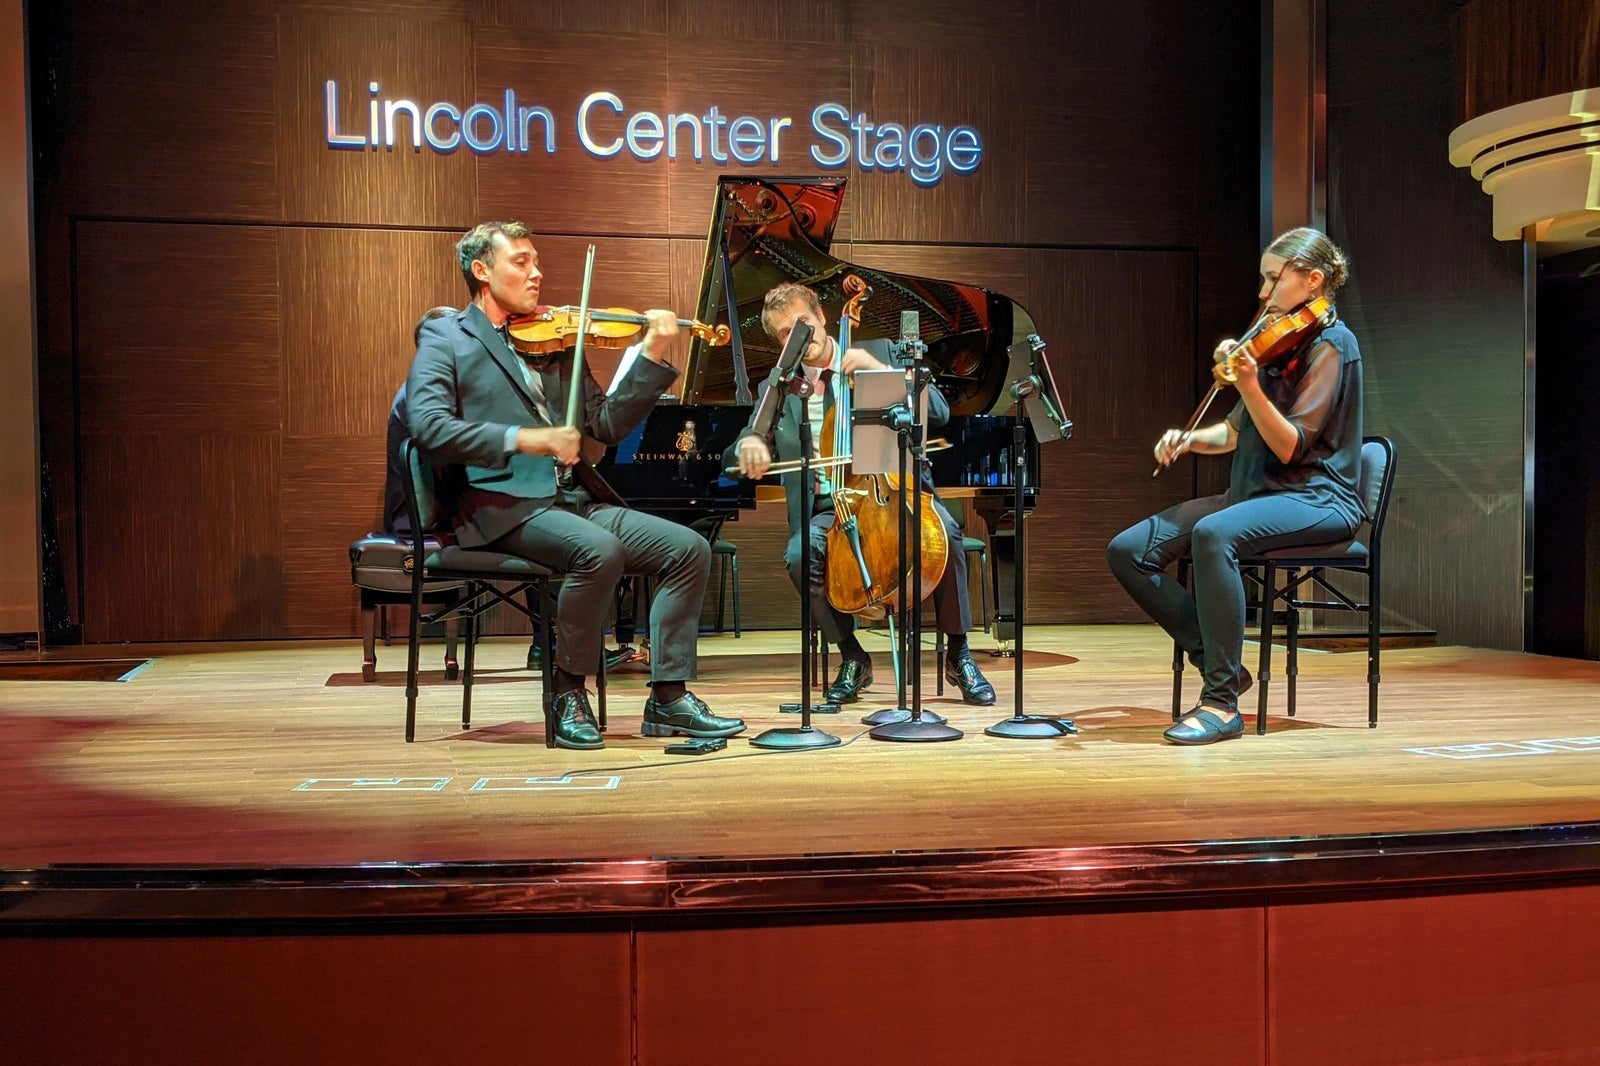 Piano quartet plays on cruise ship stage